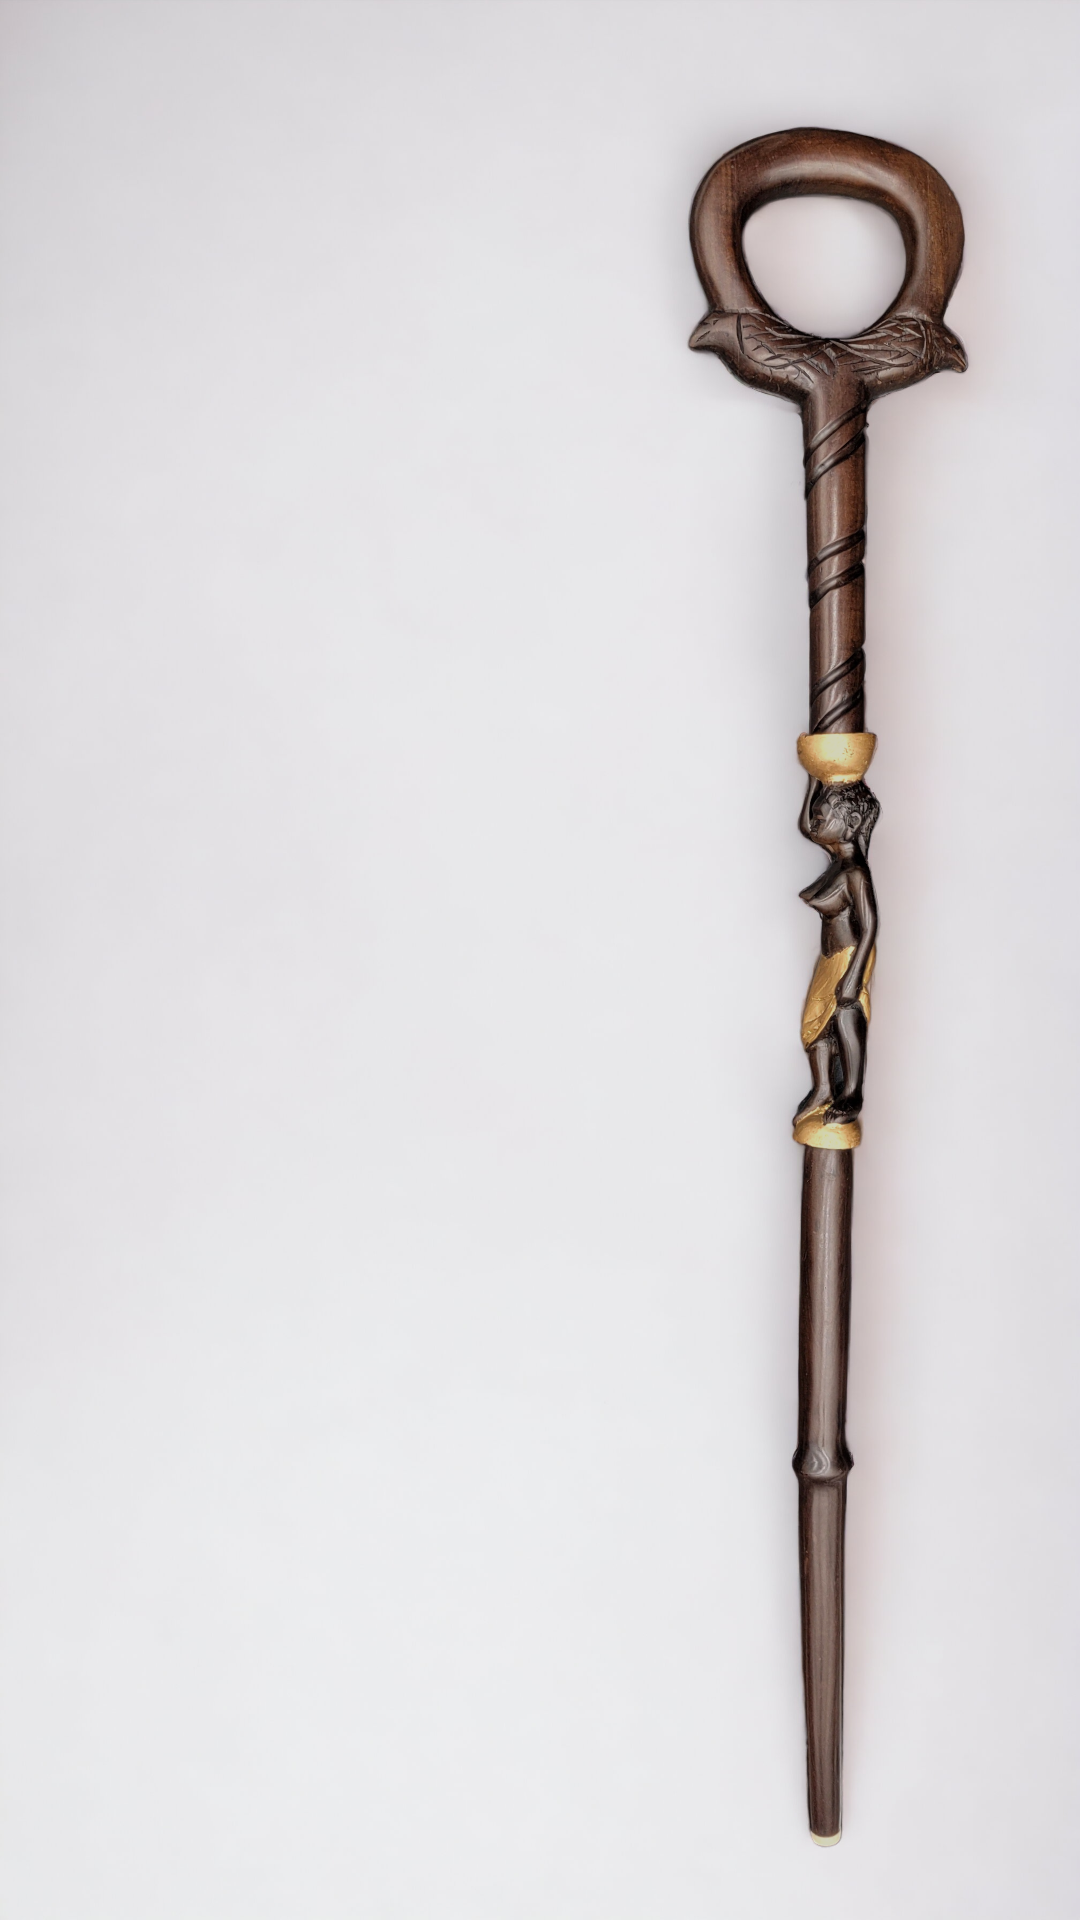 HANDCRAFTED AFRICAN WOOD CANE - GOLDEN WOMAN